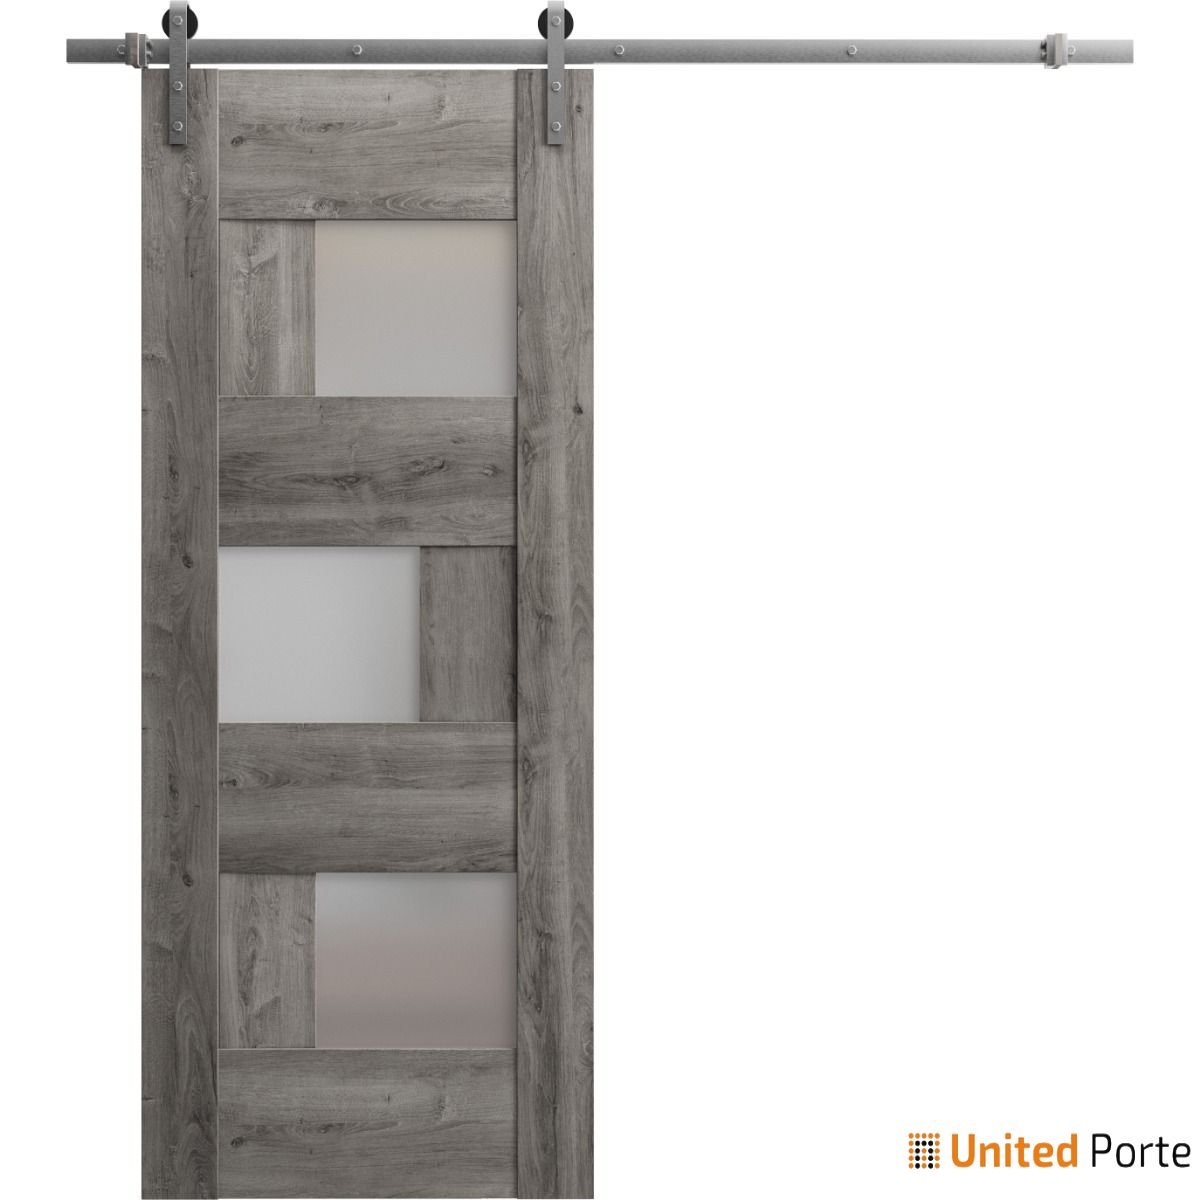 Sete 6933 Nebraska Grey Barn Door with Frosted Glass and Silver Rail